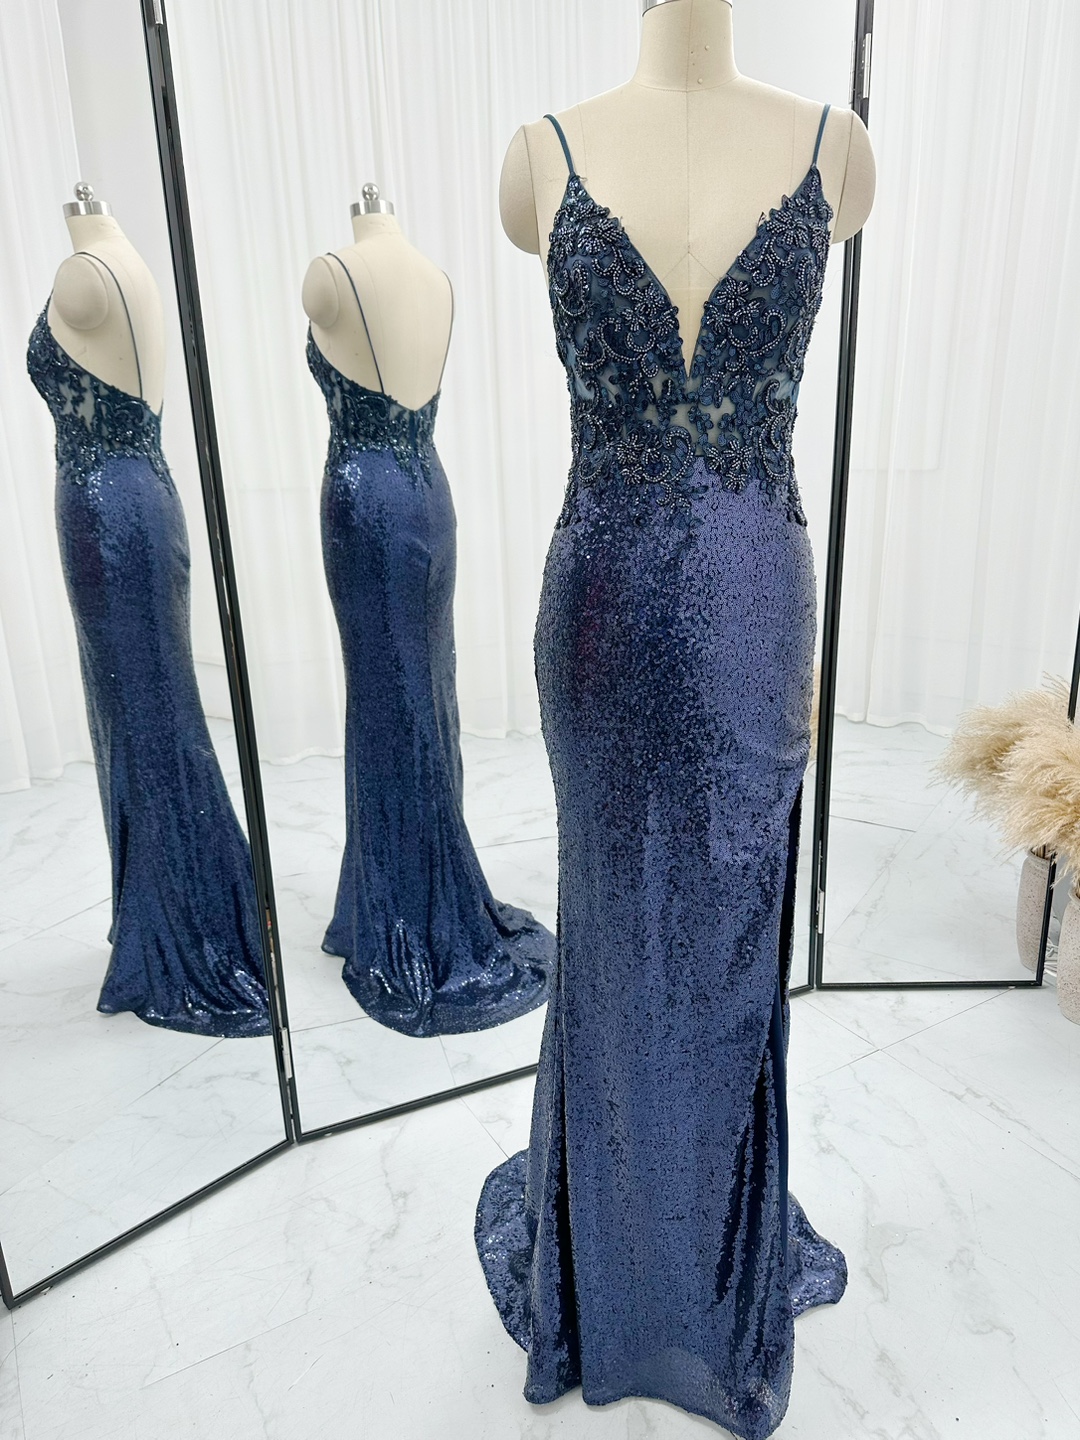 Spaghetti Straps Plunging Neck Navy Sequin Prom Dress